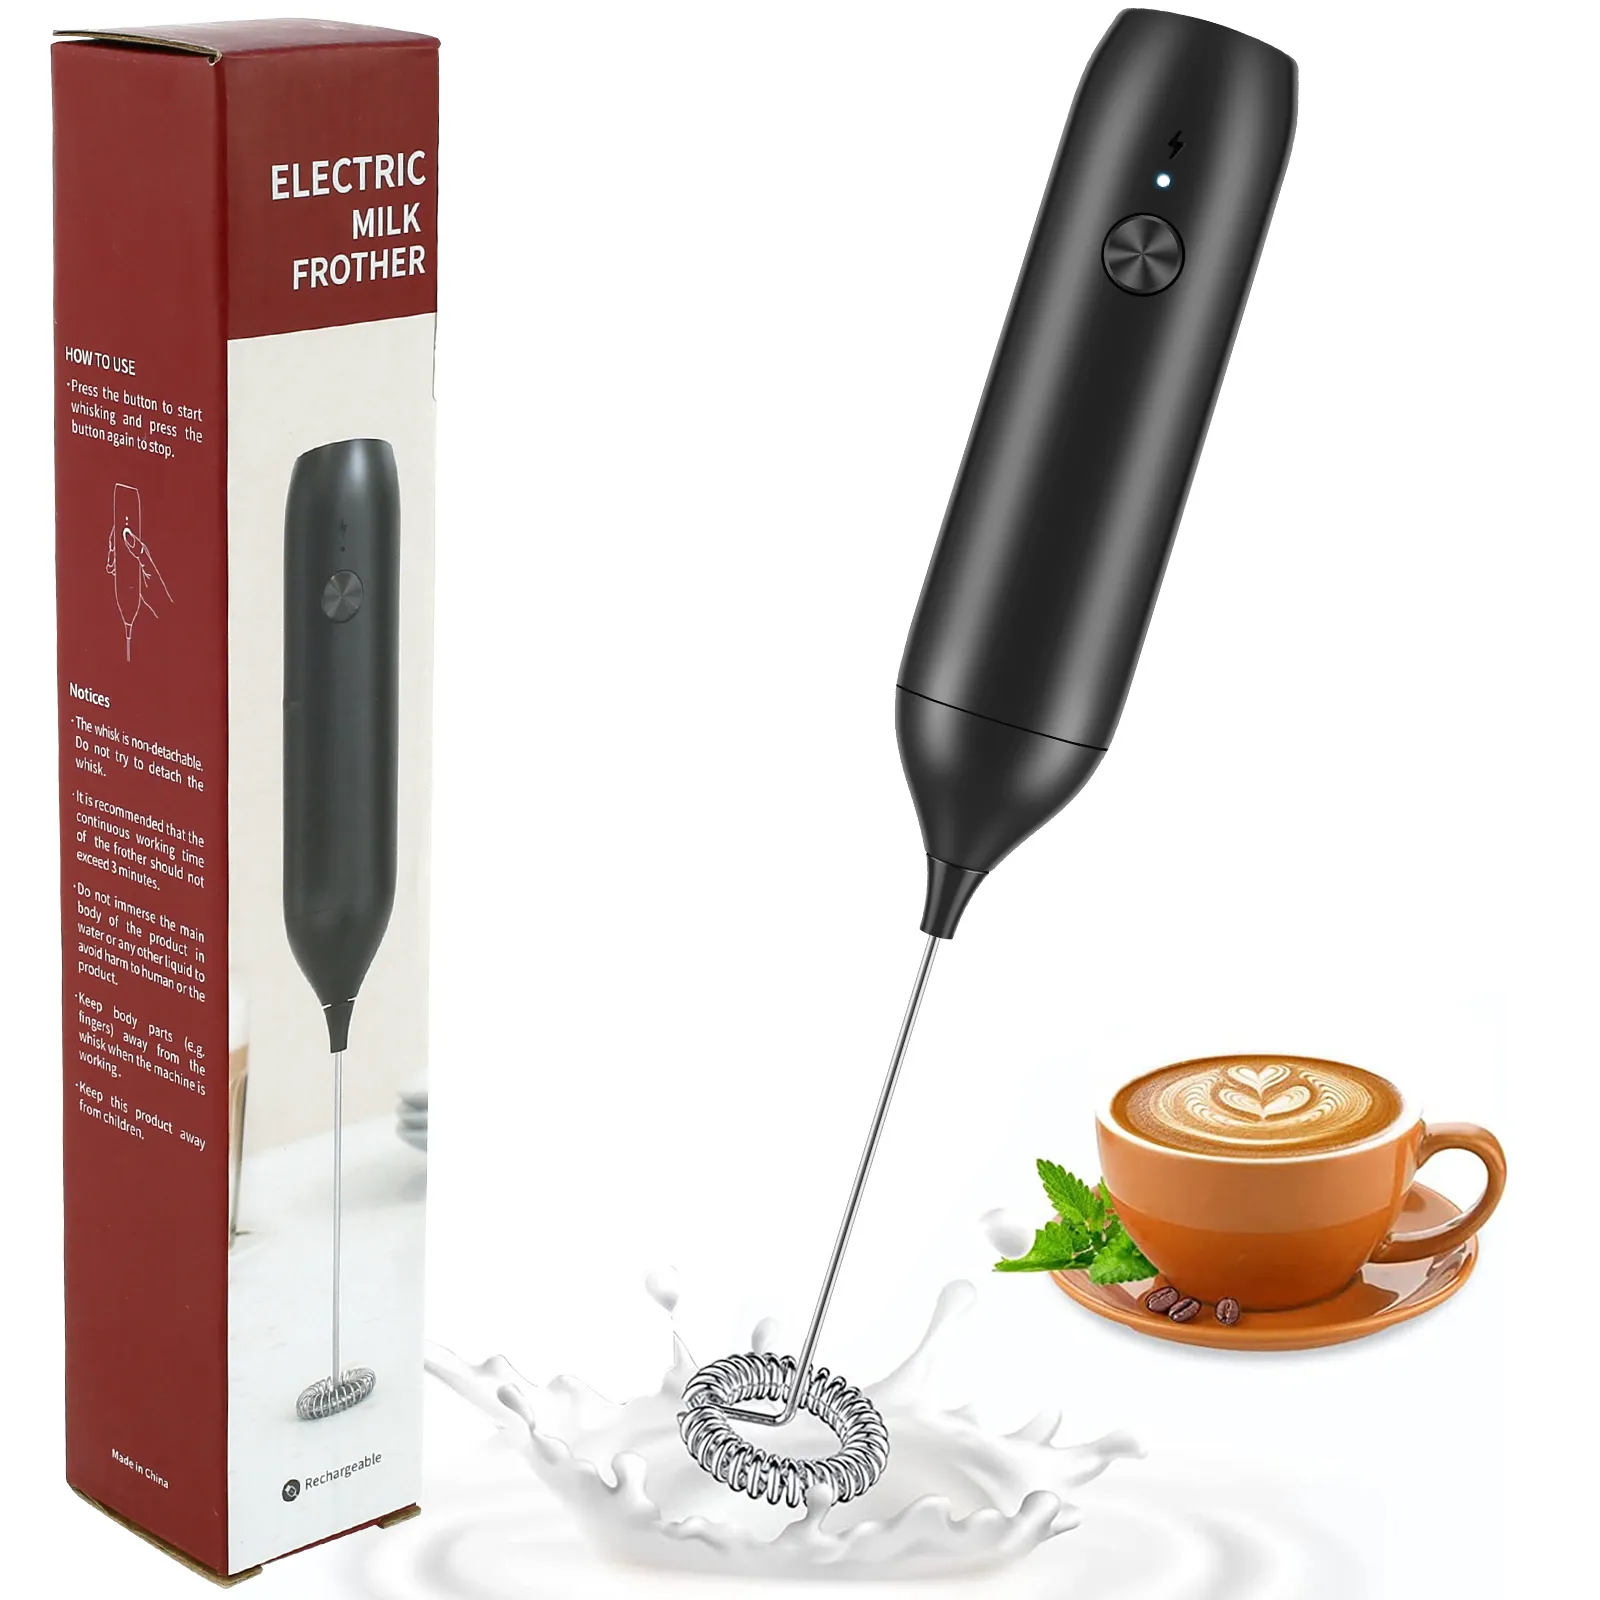 The Whisk USB Rechargeable Electric Frother